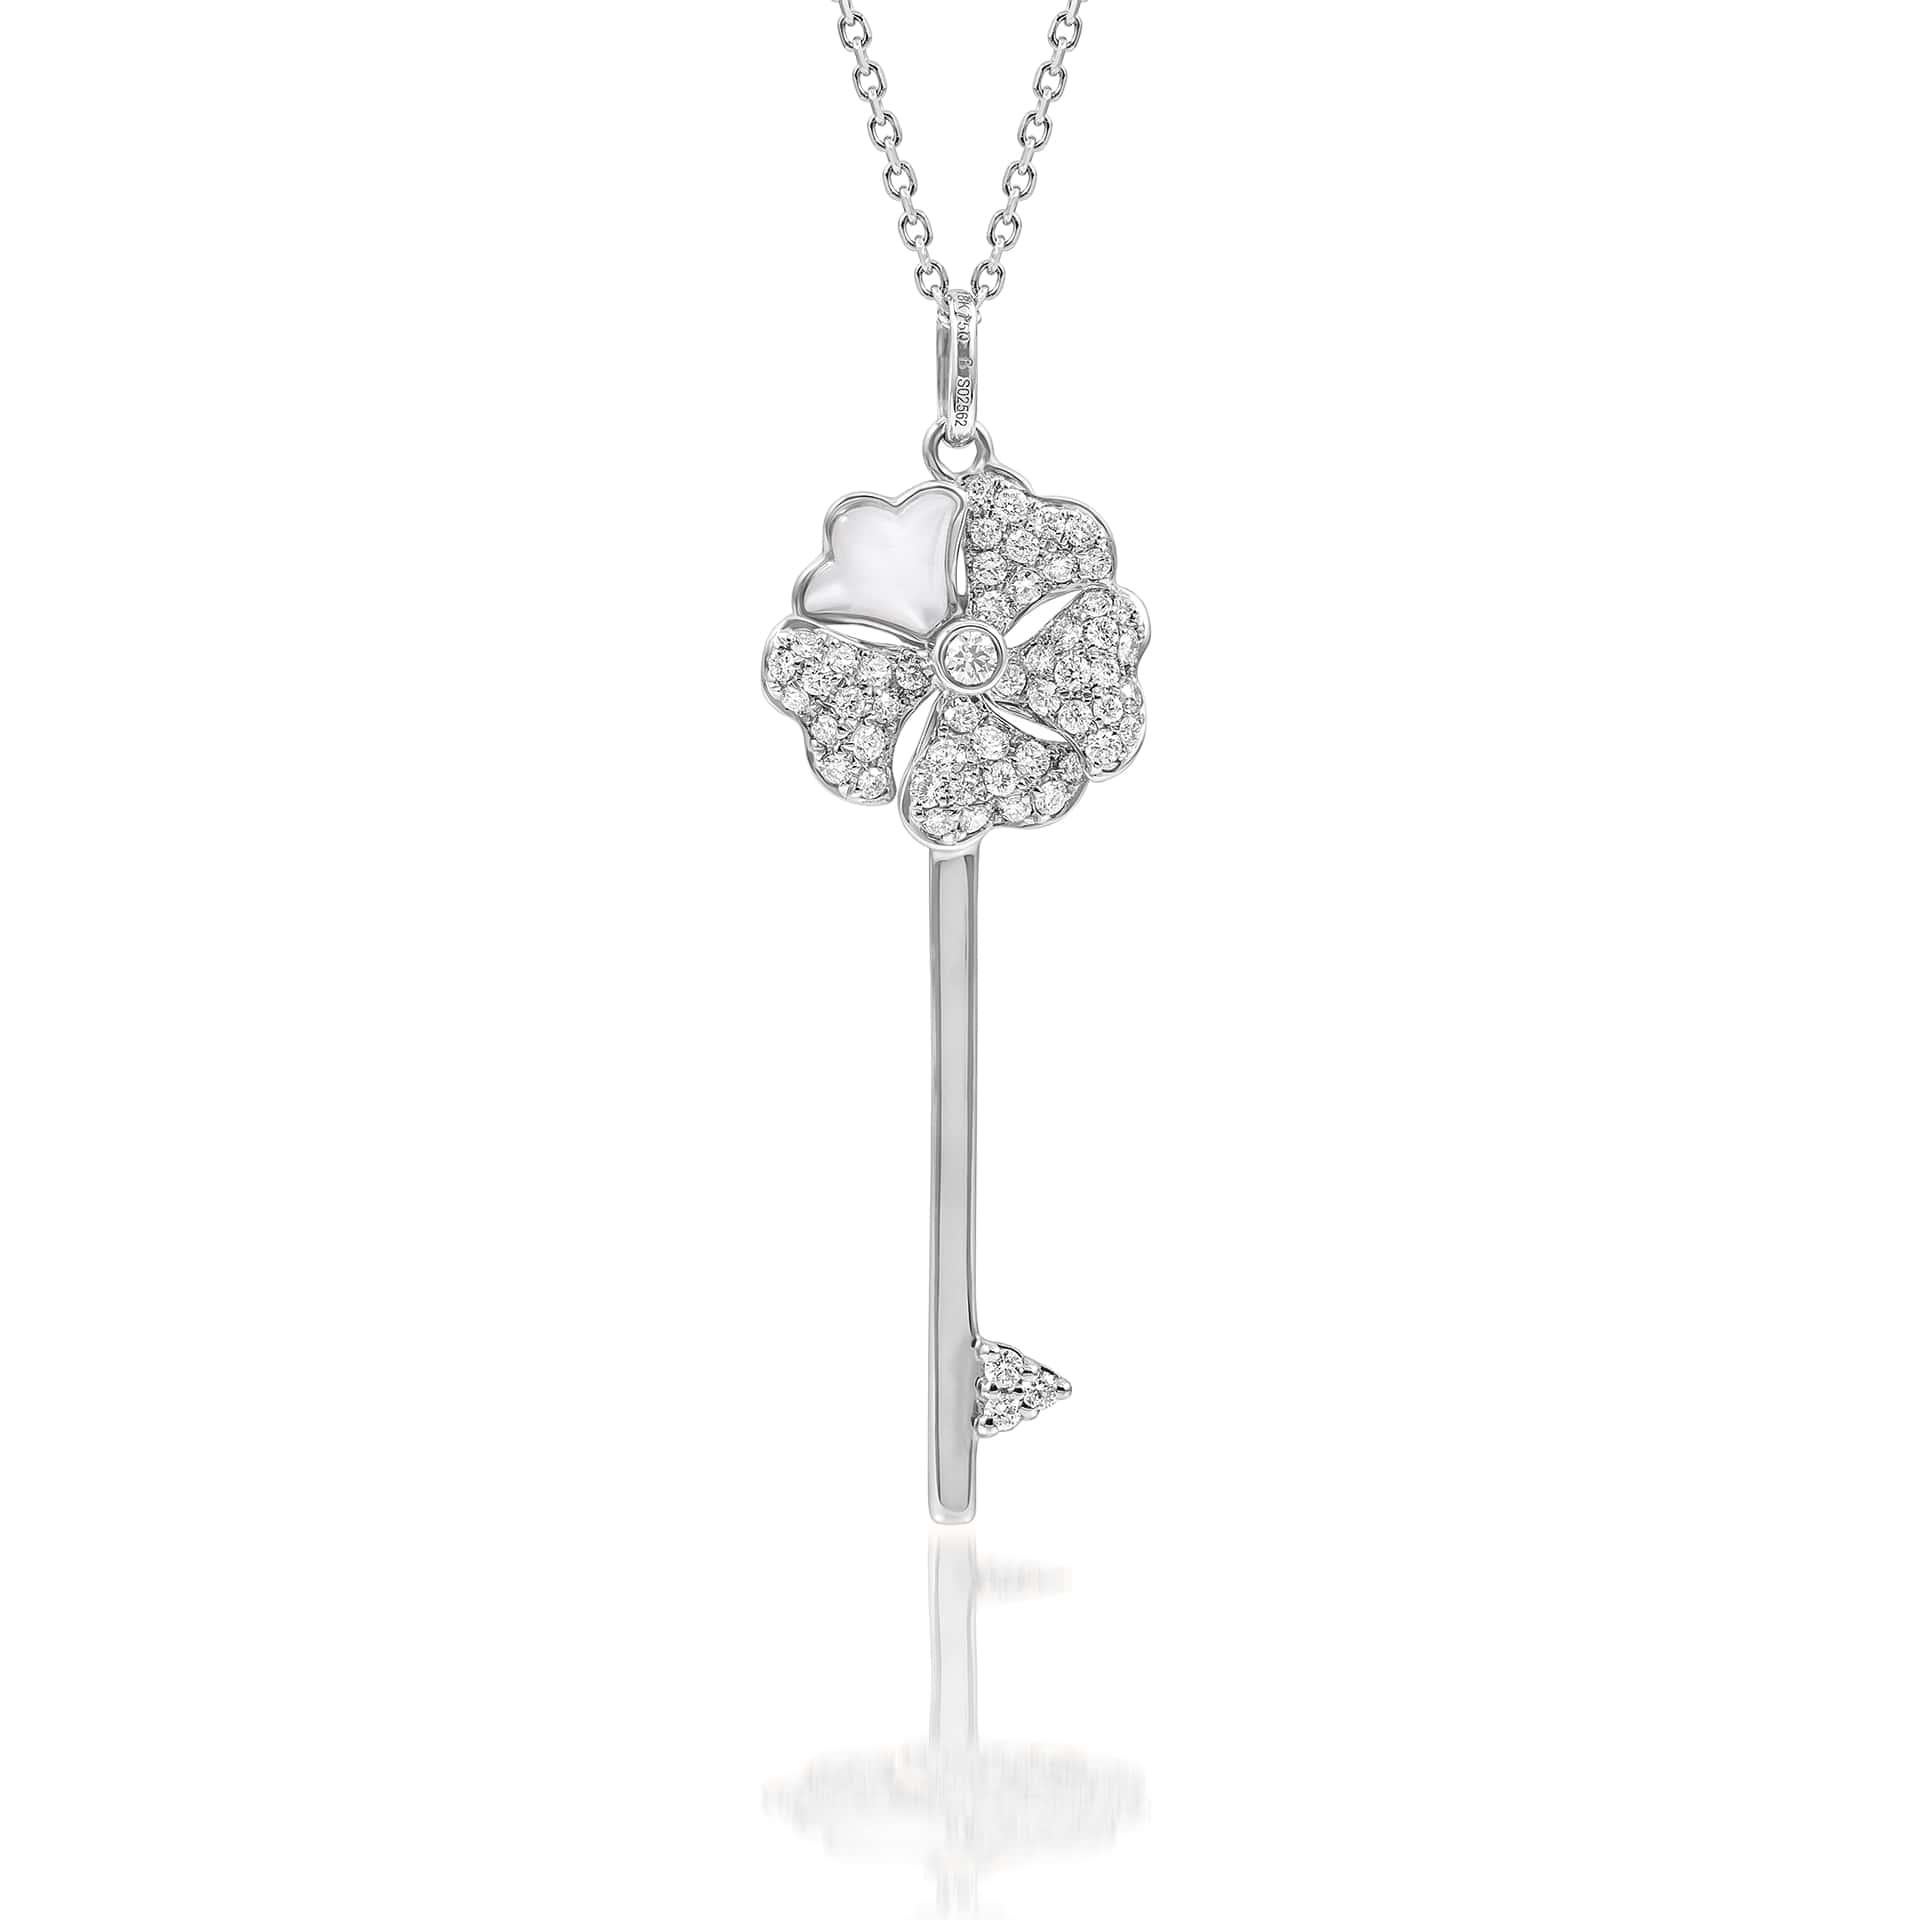 Bloom Diamond Key Necklace with Mother-of-Pearl in 18K White Gold

Inspired by the exquisite petals of the alpine cinquefoil flower, the Bloom collection combines the richness of diamonds and precious metals with the light versatility of this